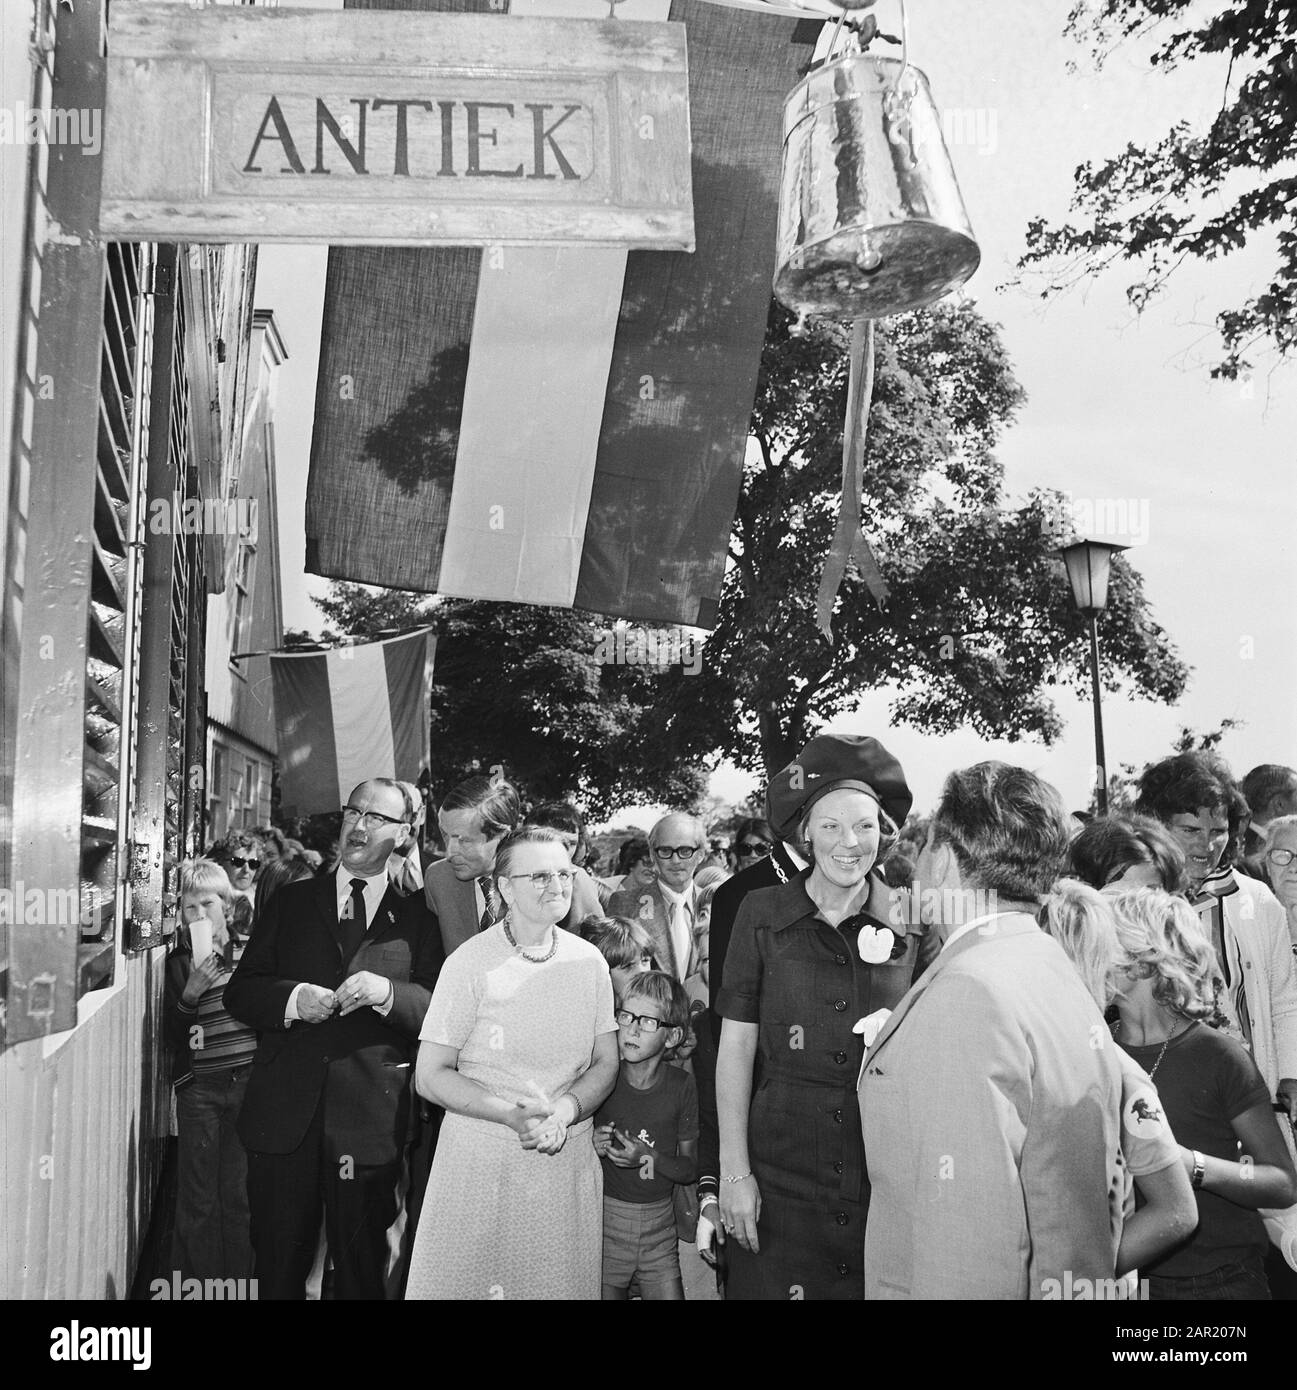 Princess Beatrix and Prins Claus visits province of North Holland (second day), visit Broek in Waterland Date: 22 August 1973 Location: Broek in Waterland, Noord-Holland Keywords: visits, princes, princesses, provinces Personal name: Beatrix, princess, Claus, prince Stock Photo